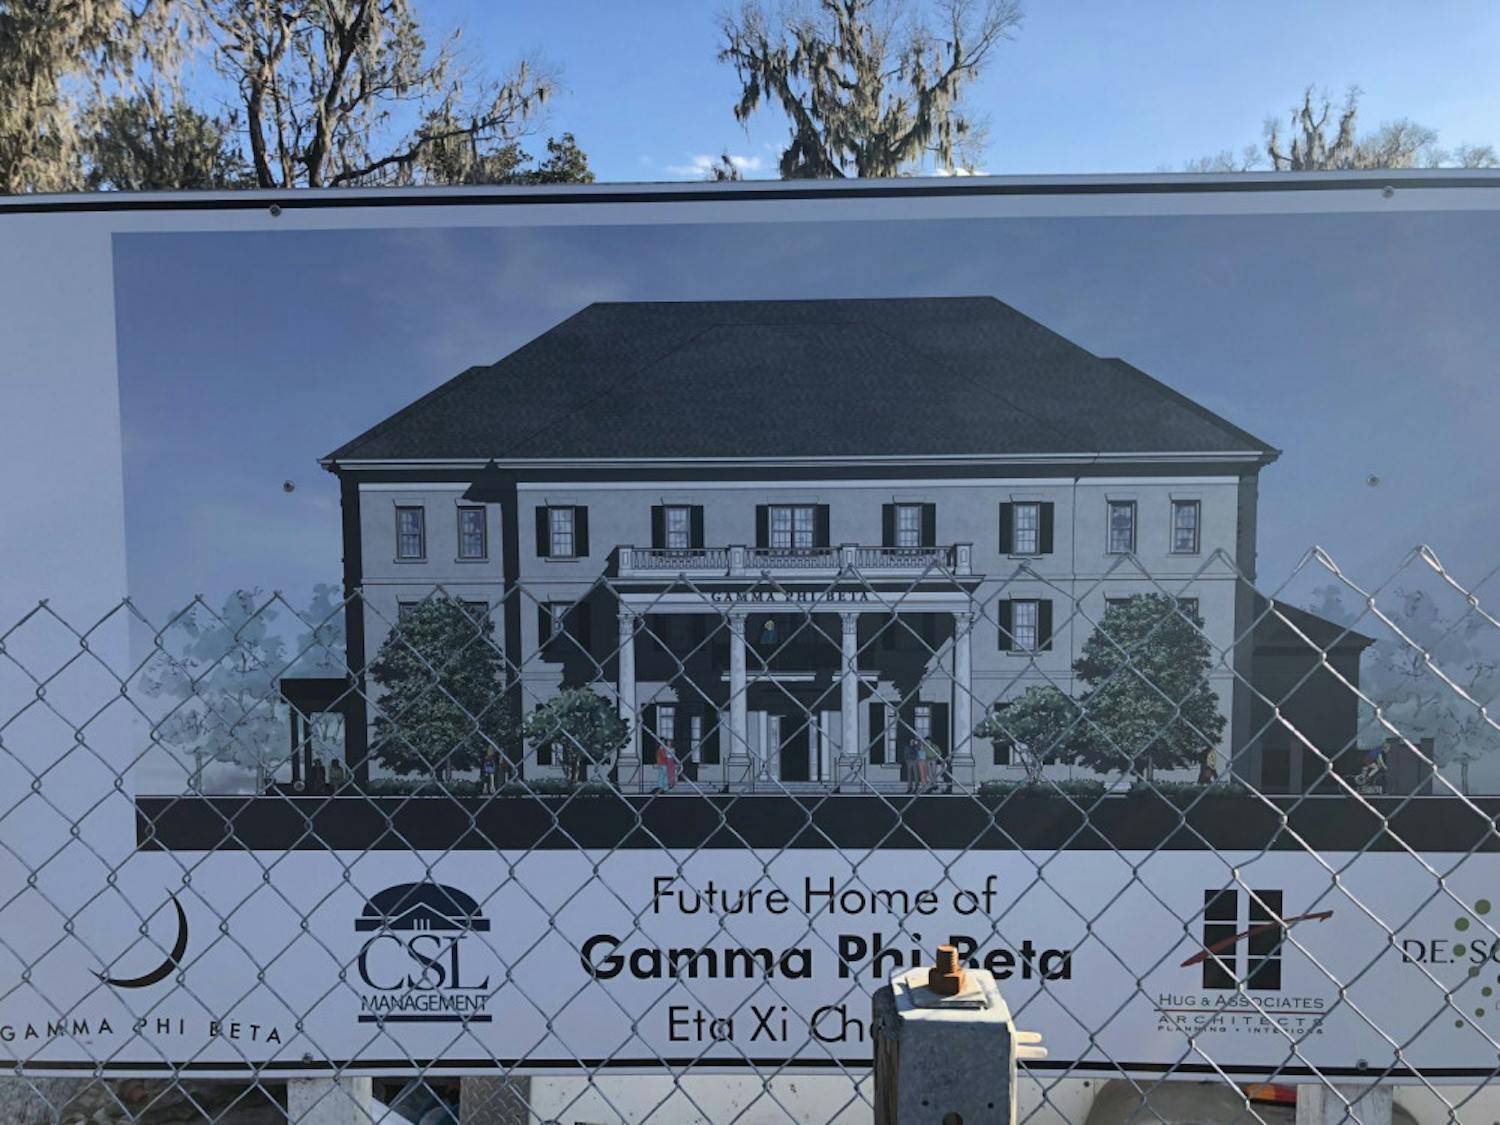 A rendition of Gamma Phi Beta's new house, located at 1251 SW 9th Ave., which will be completed in August. Construction on the $10.5 million house started in Fall 2017.